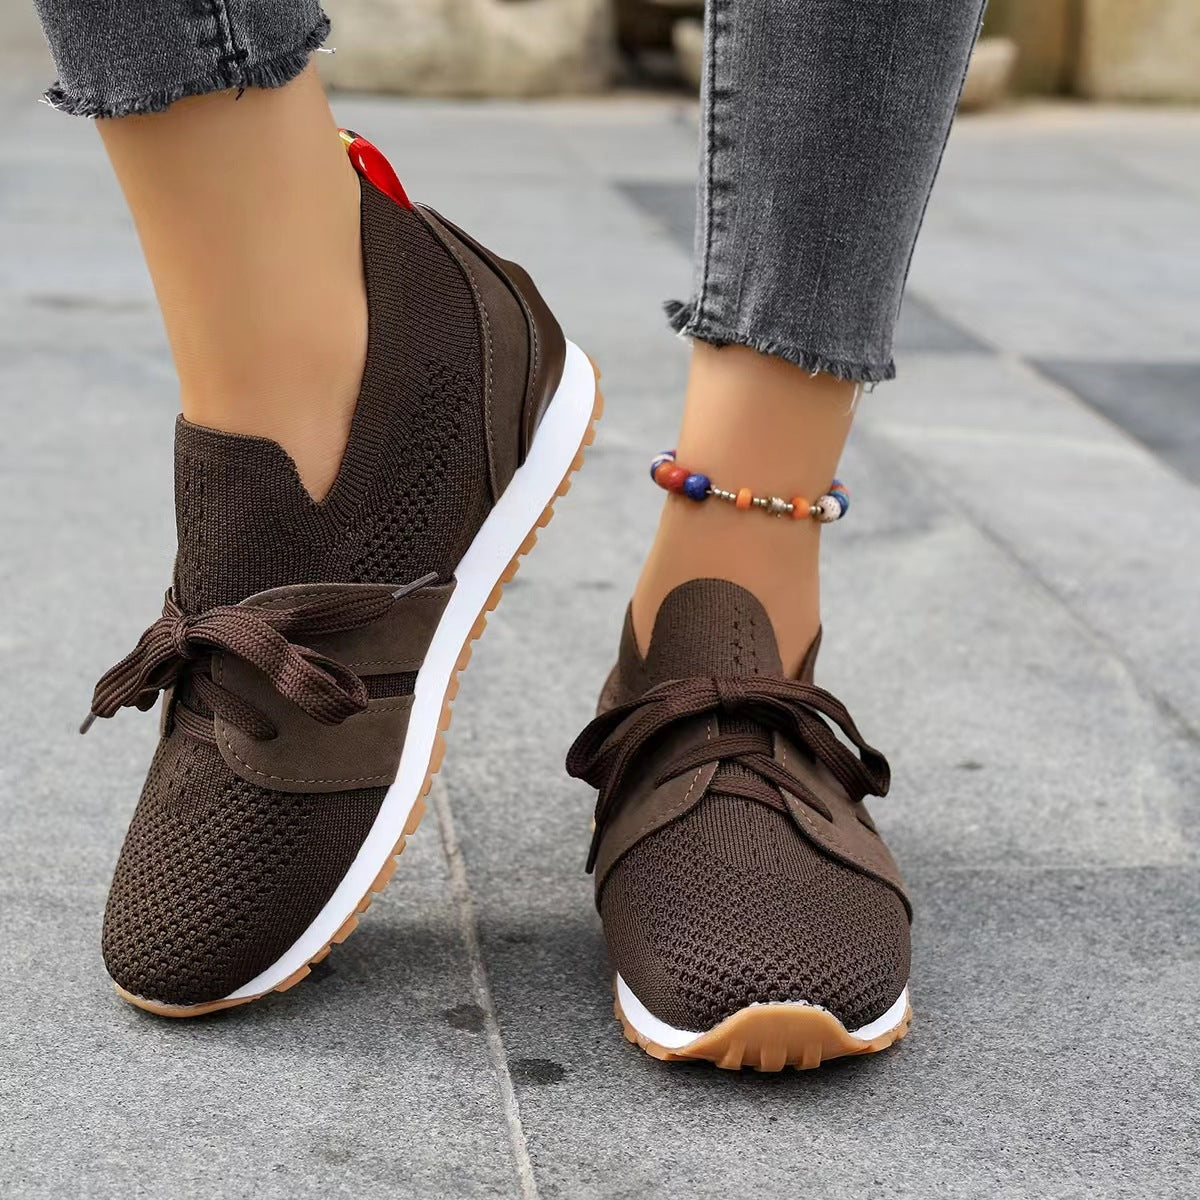 Women's Comfortable Fly Woven Mesh Lace-up Casual Shoes - Breathable Daily Sneakers - Carvan Mart